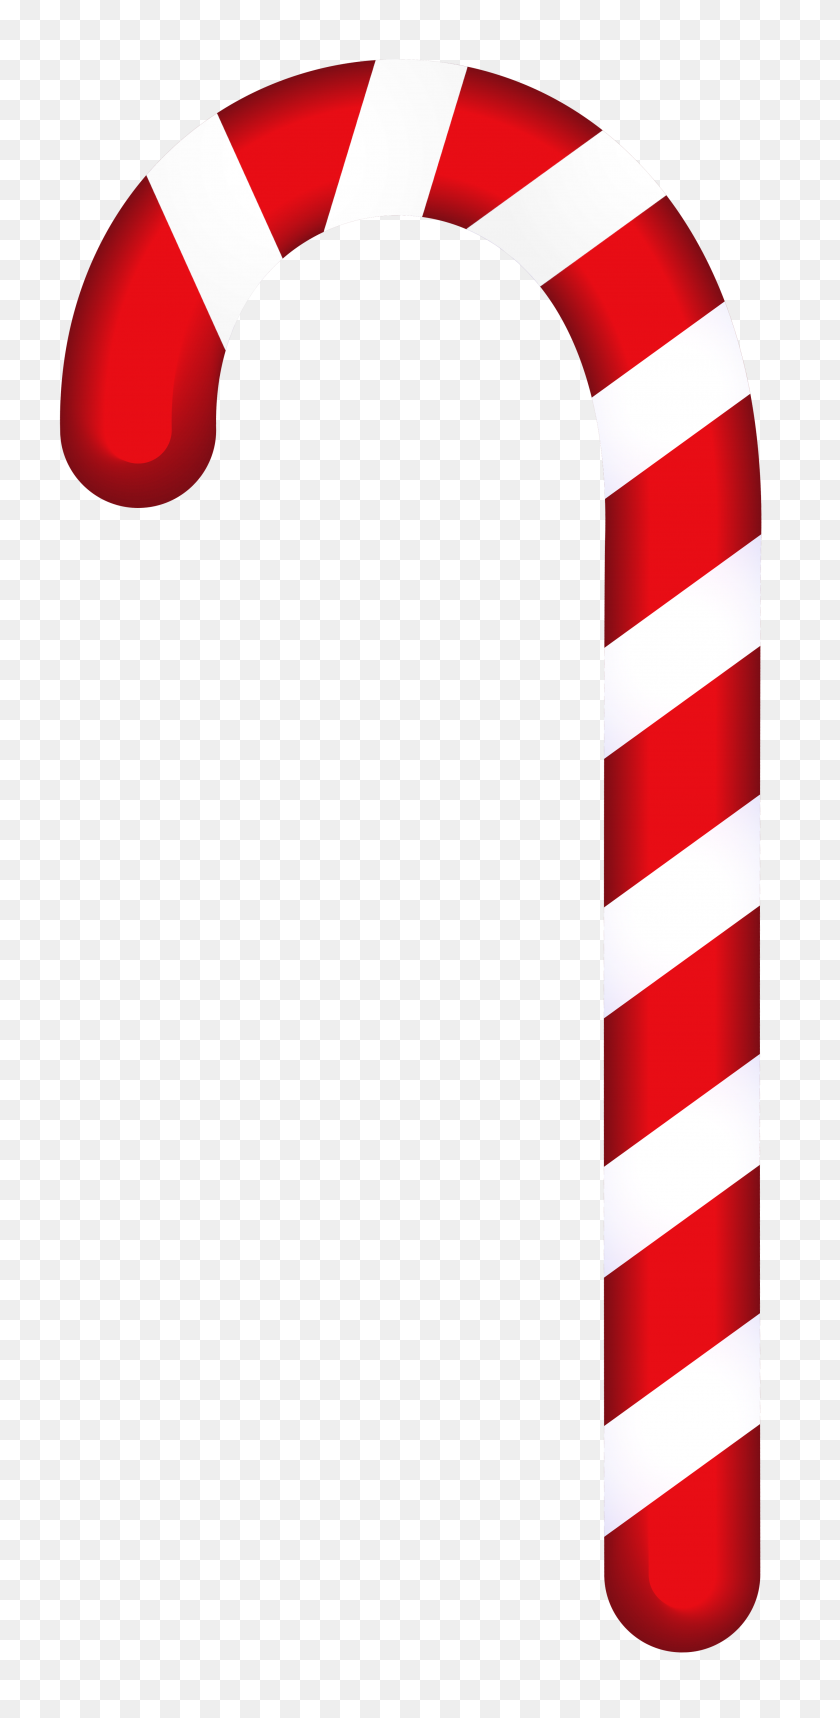 2948x6268 Candy Cane Png Clip Art - Candy Cane Clipart Free